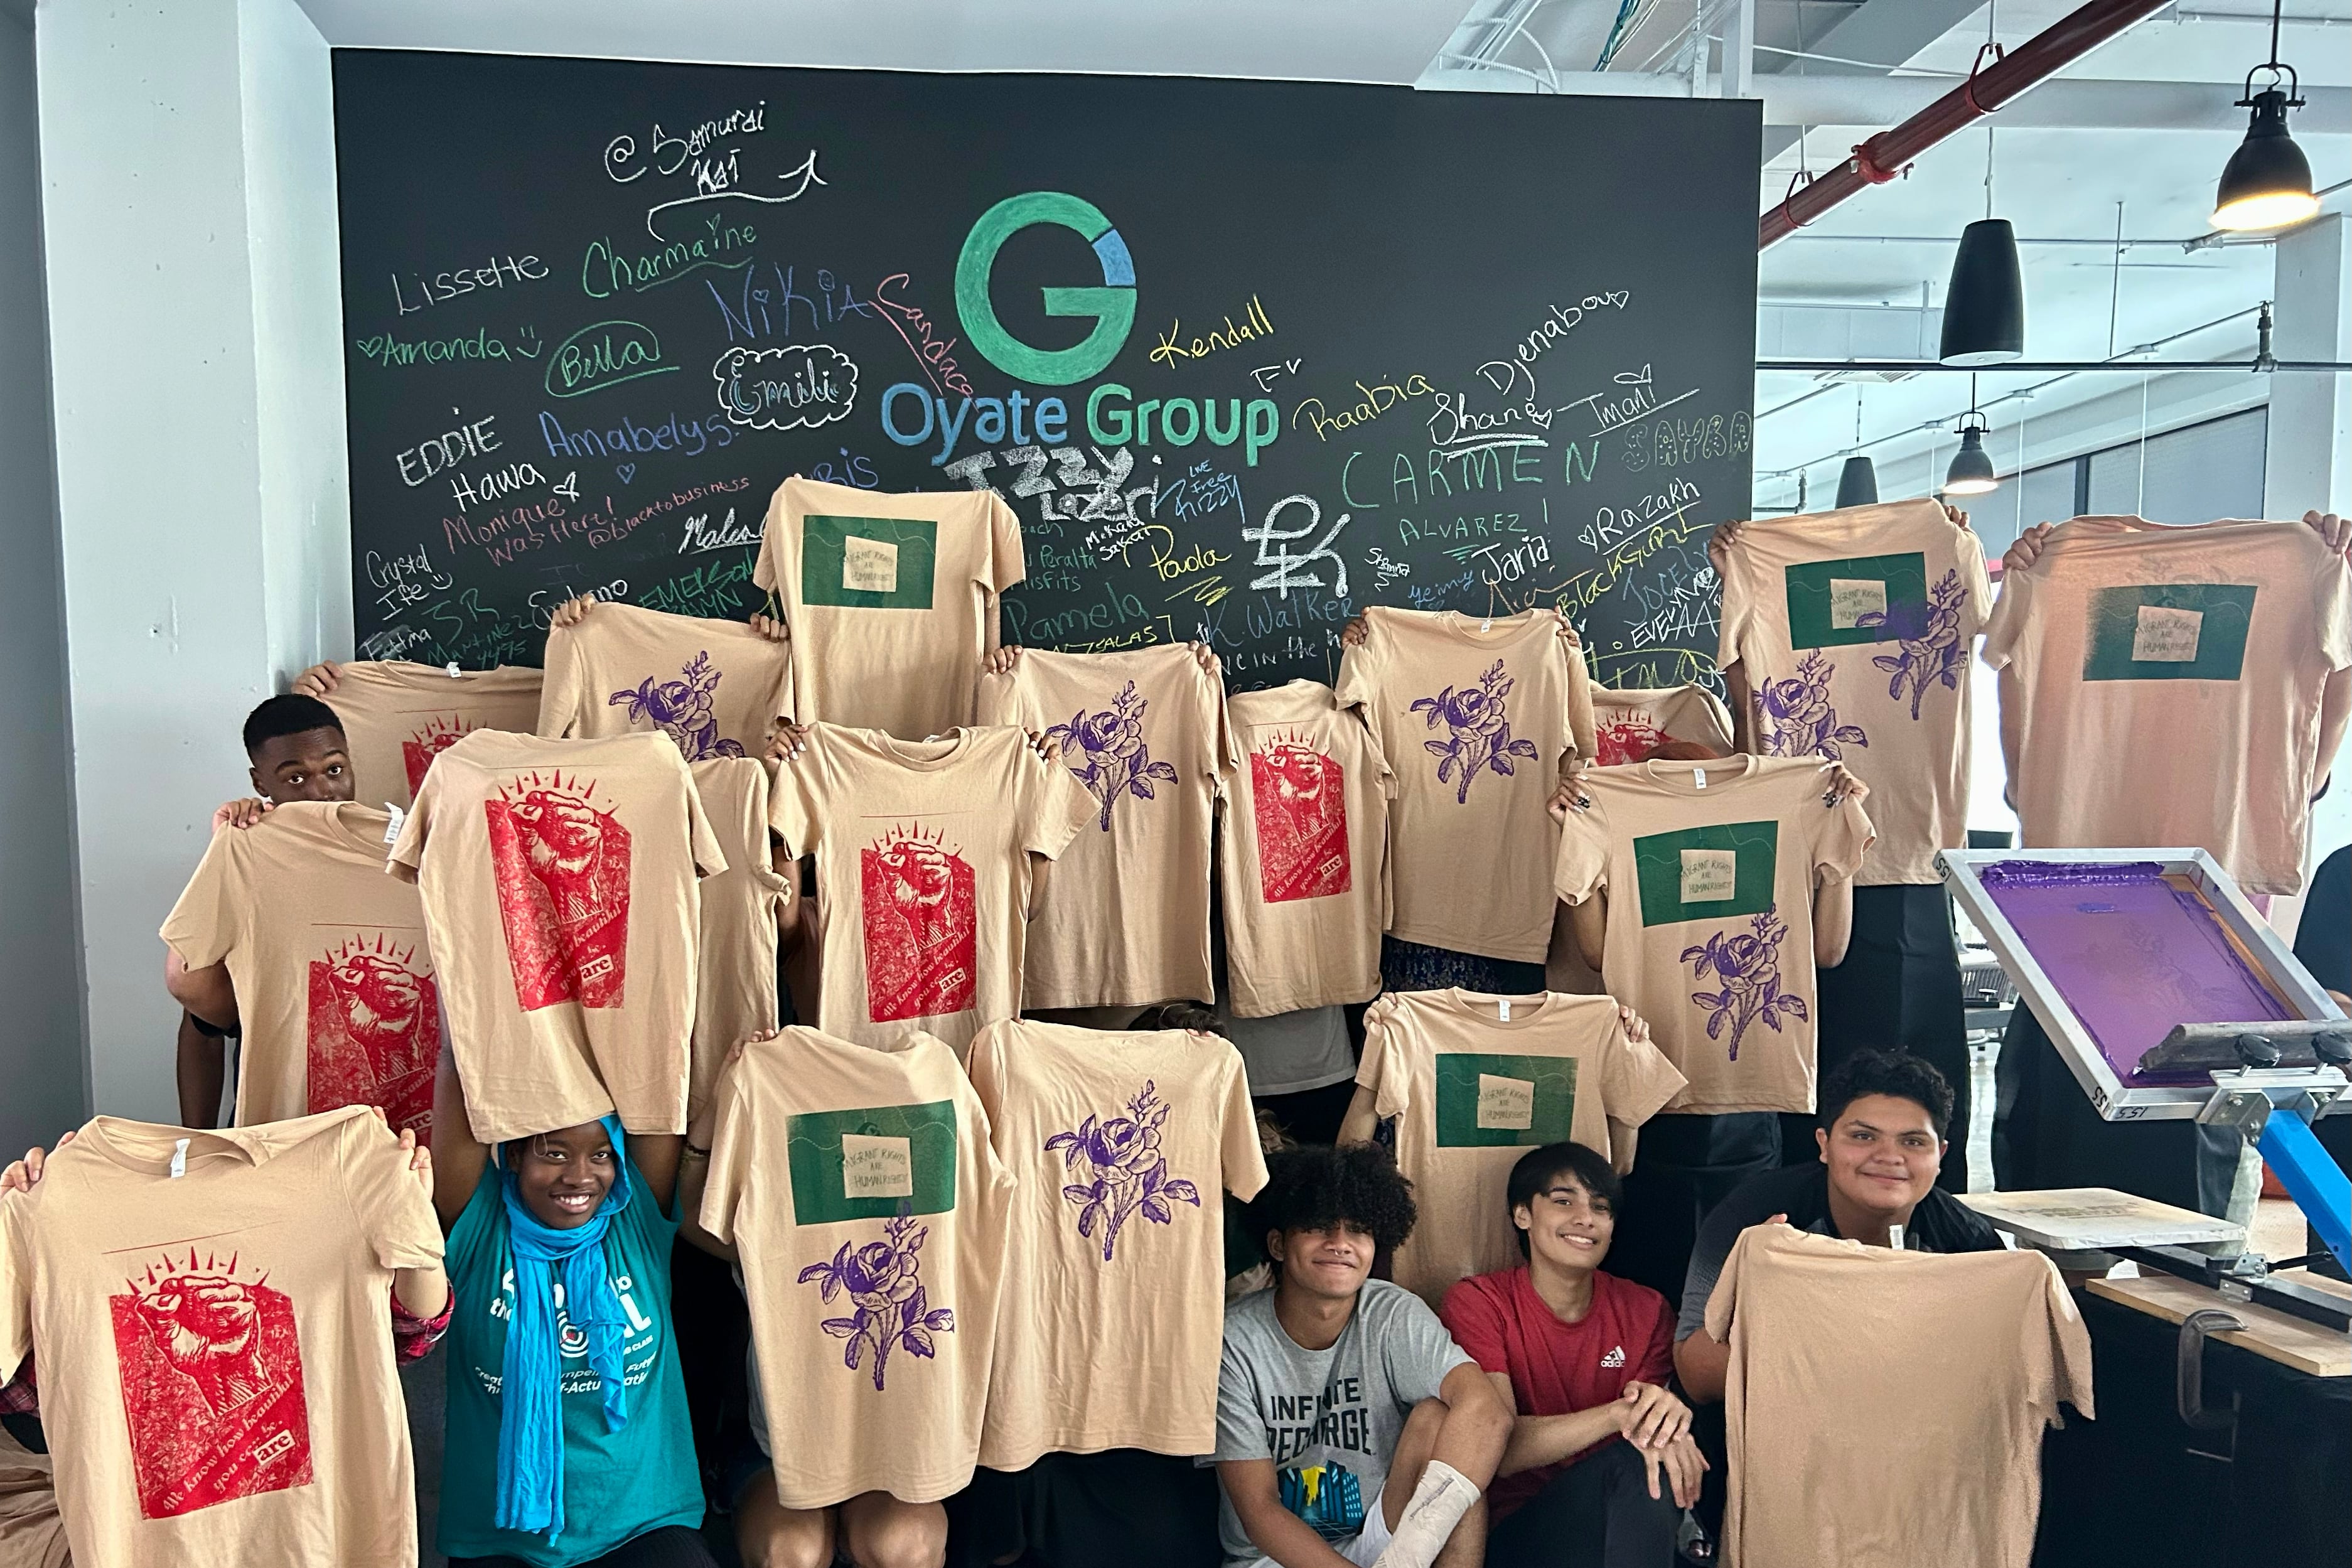 People holding up beige T-shirts in a room with a green chalkboard.